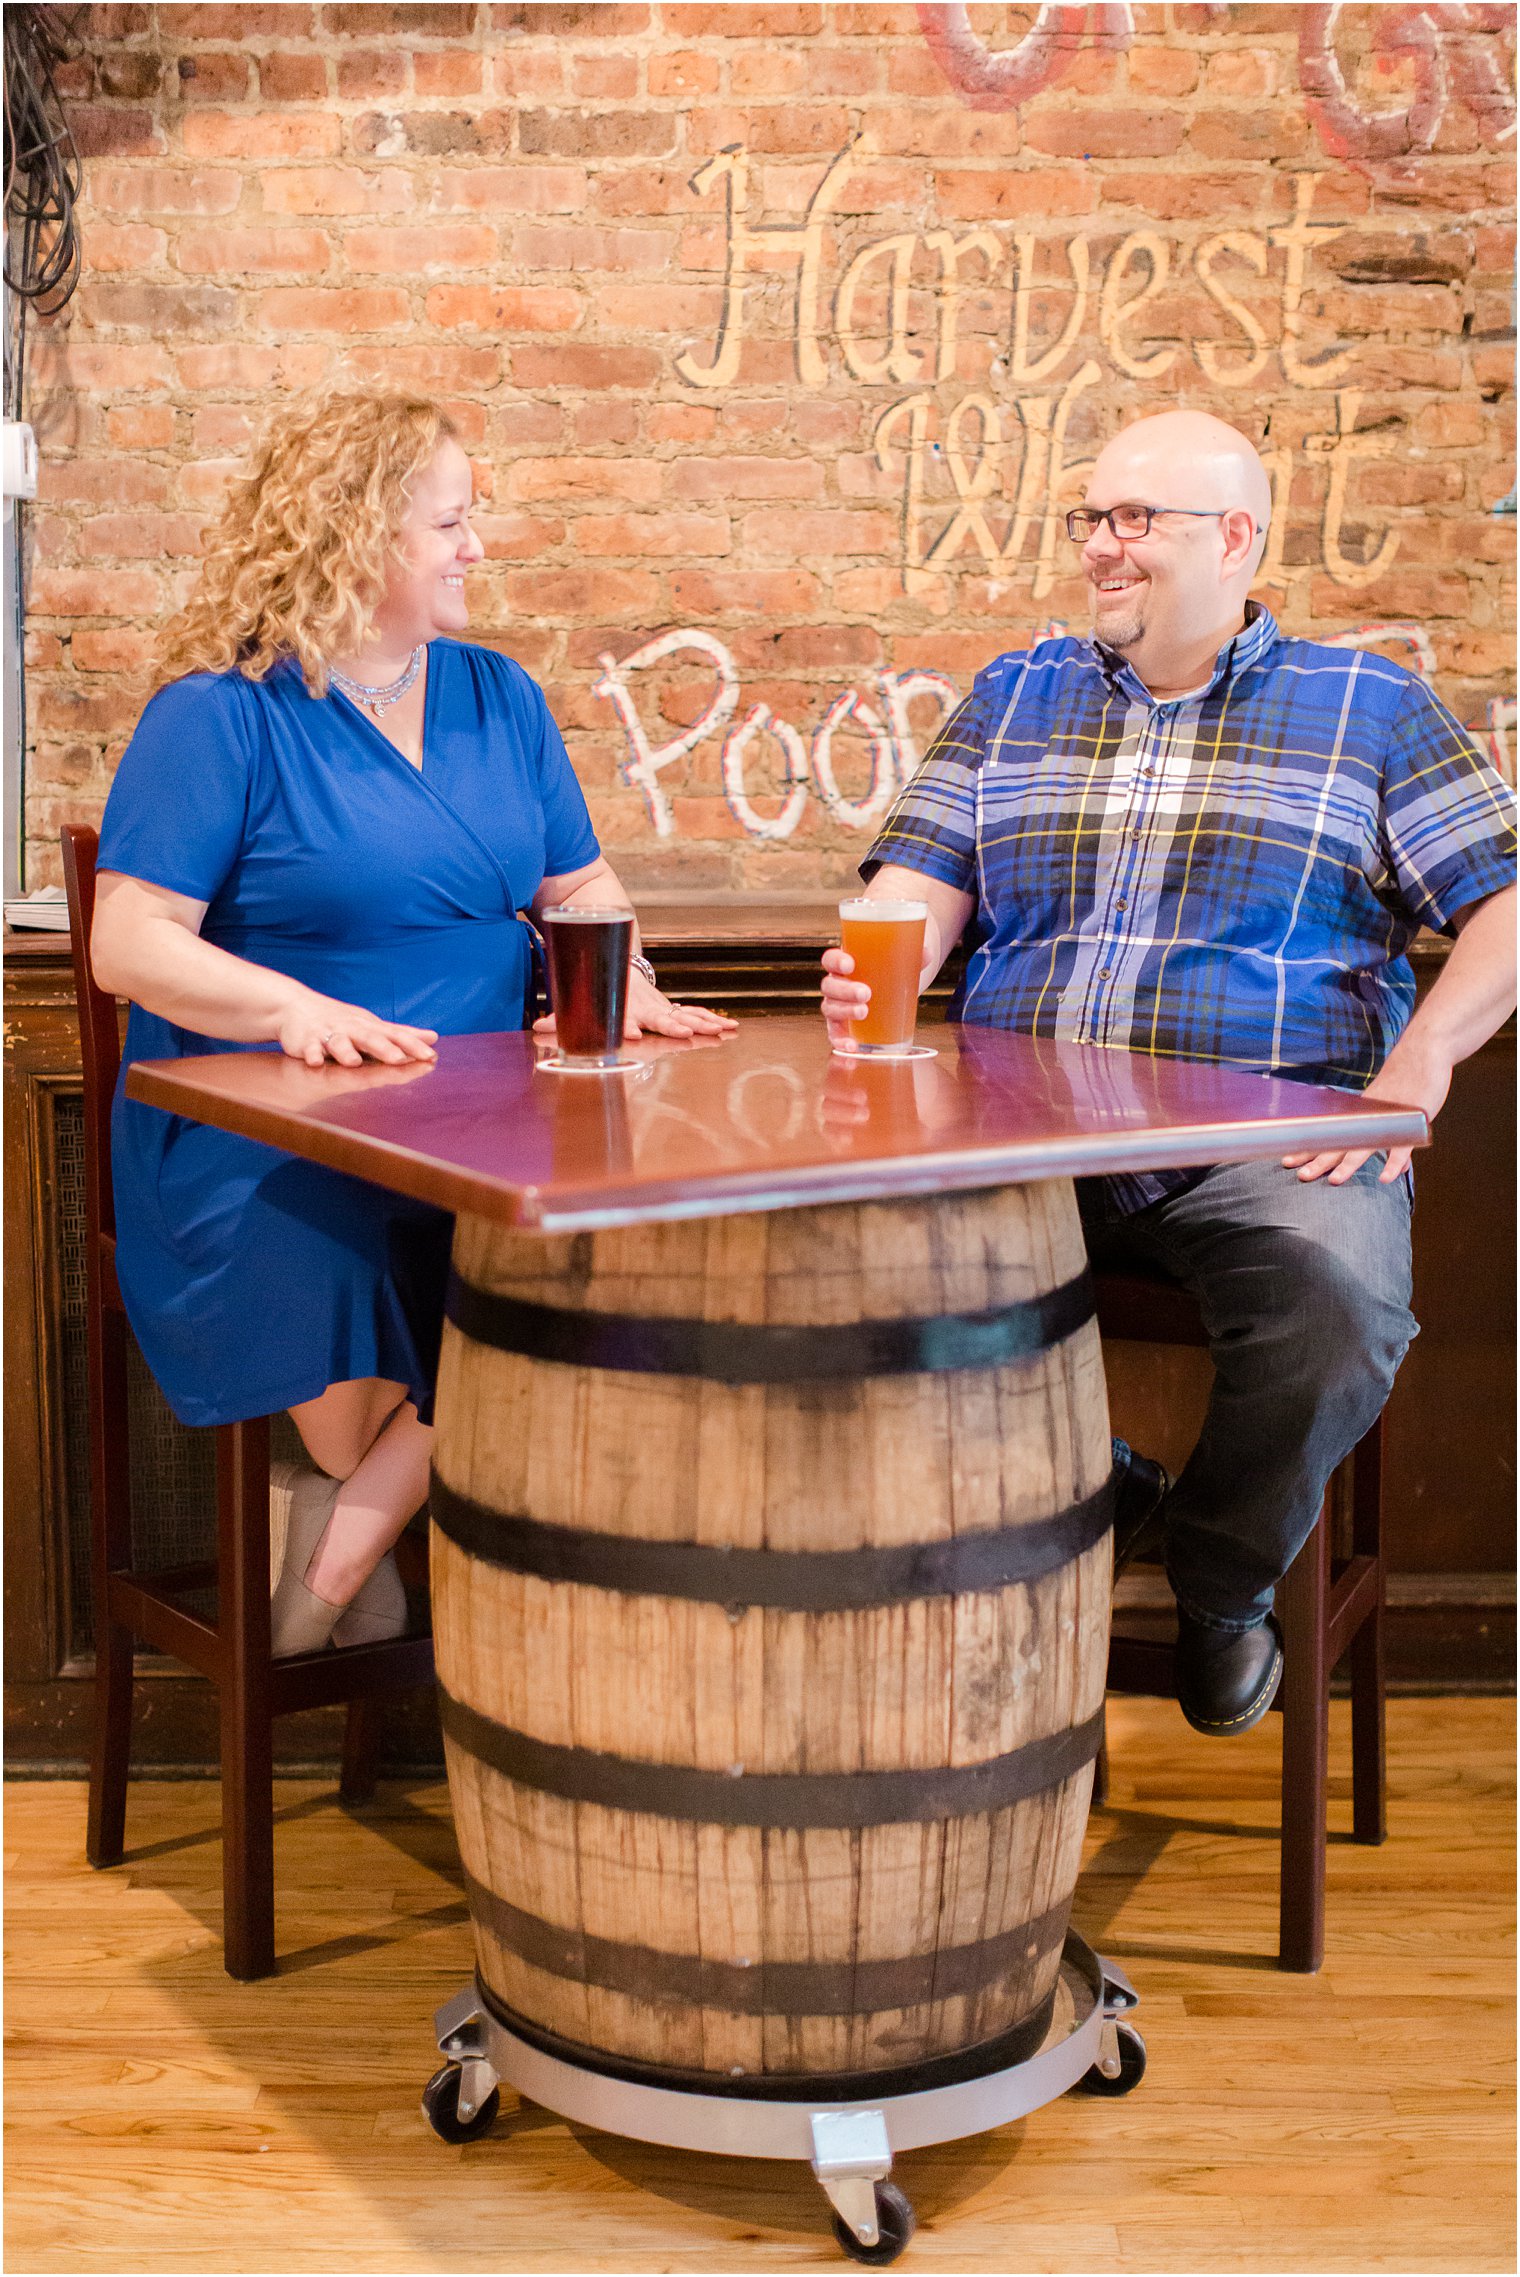 Engagement photos at Harvest Moon Brewery